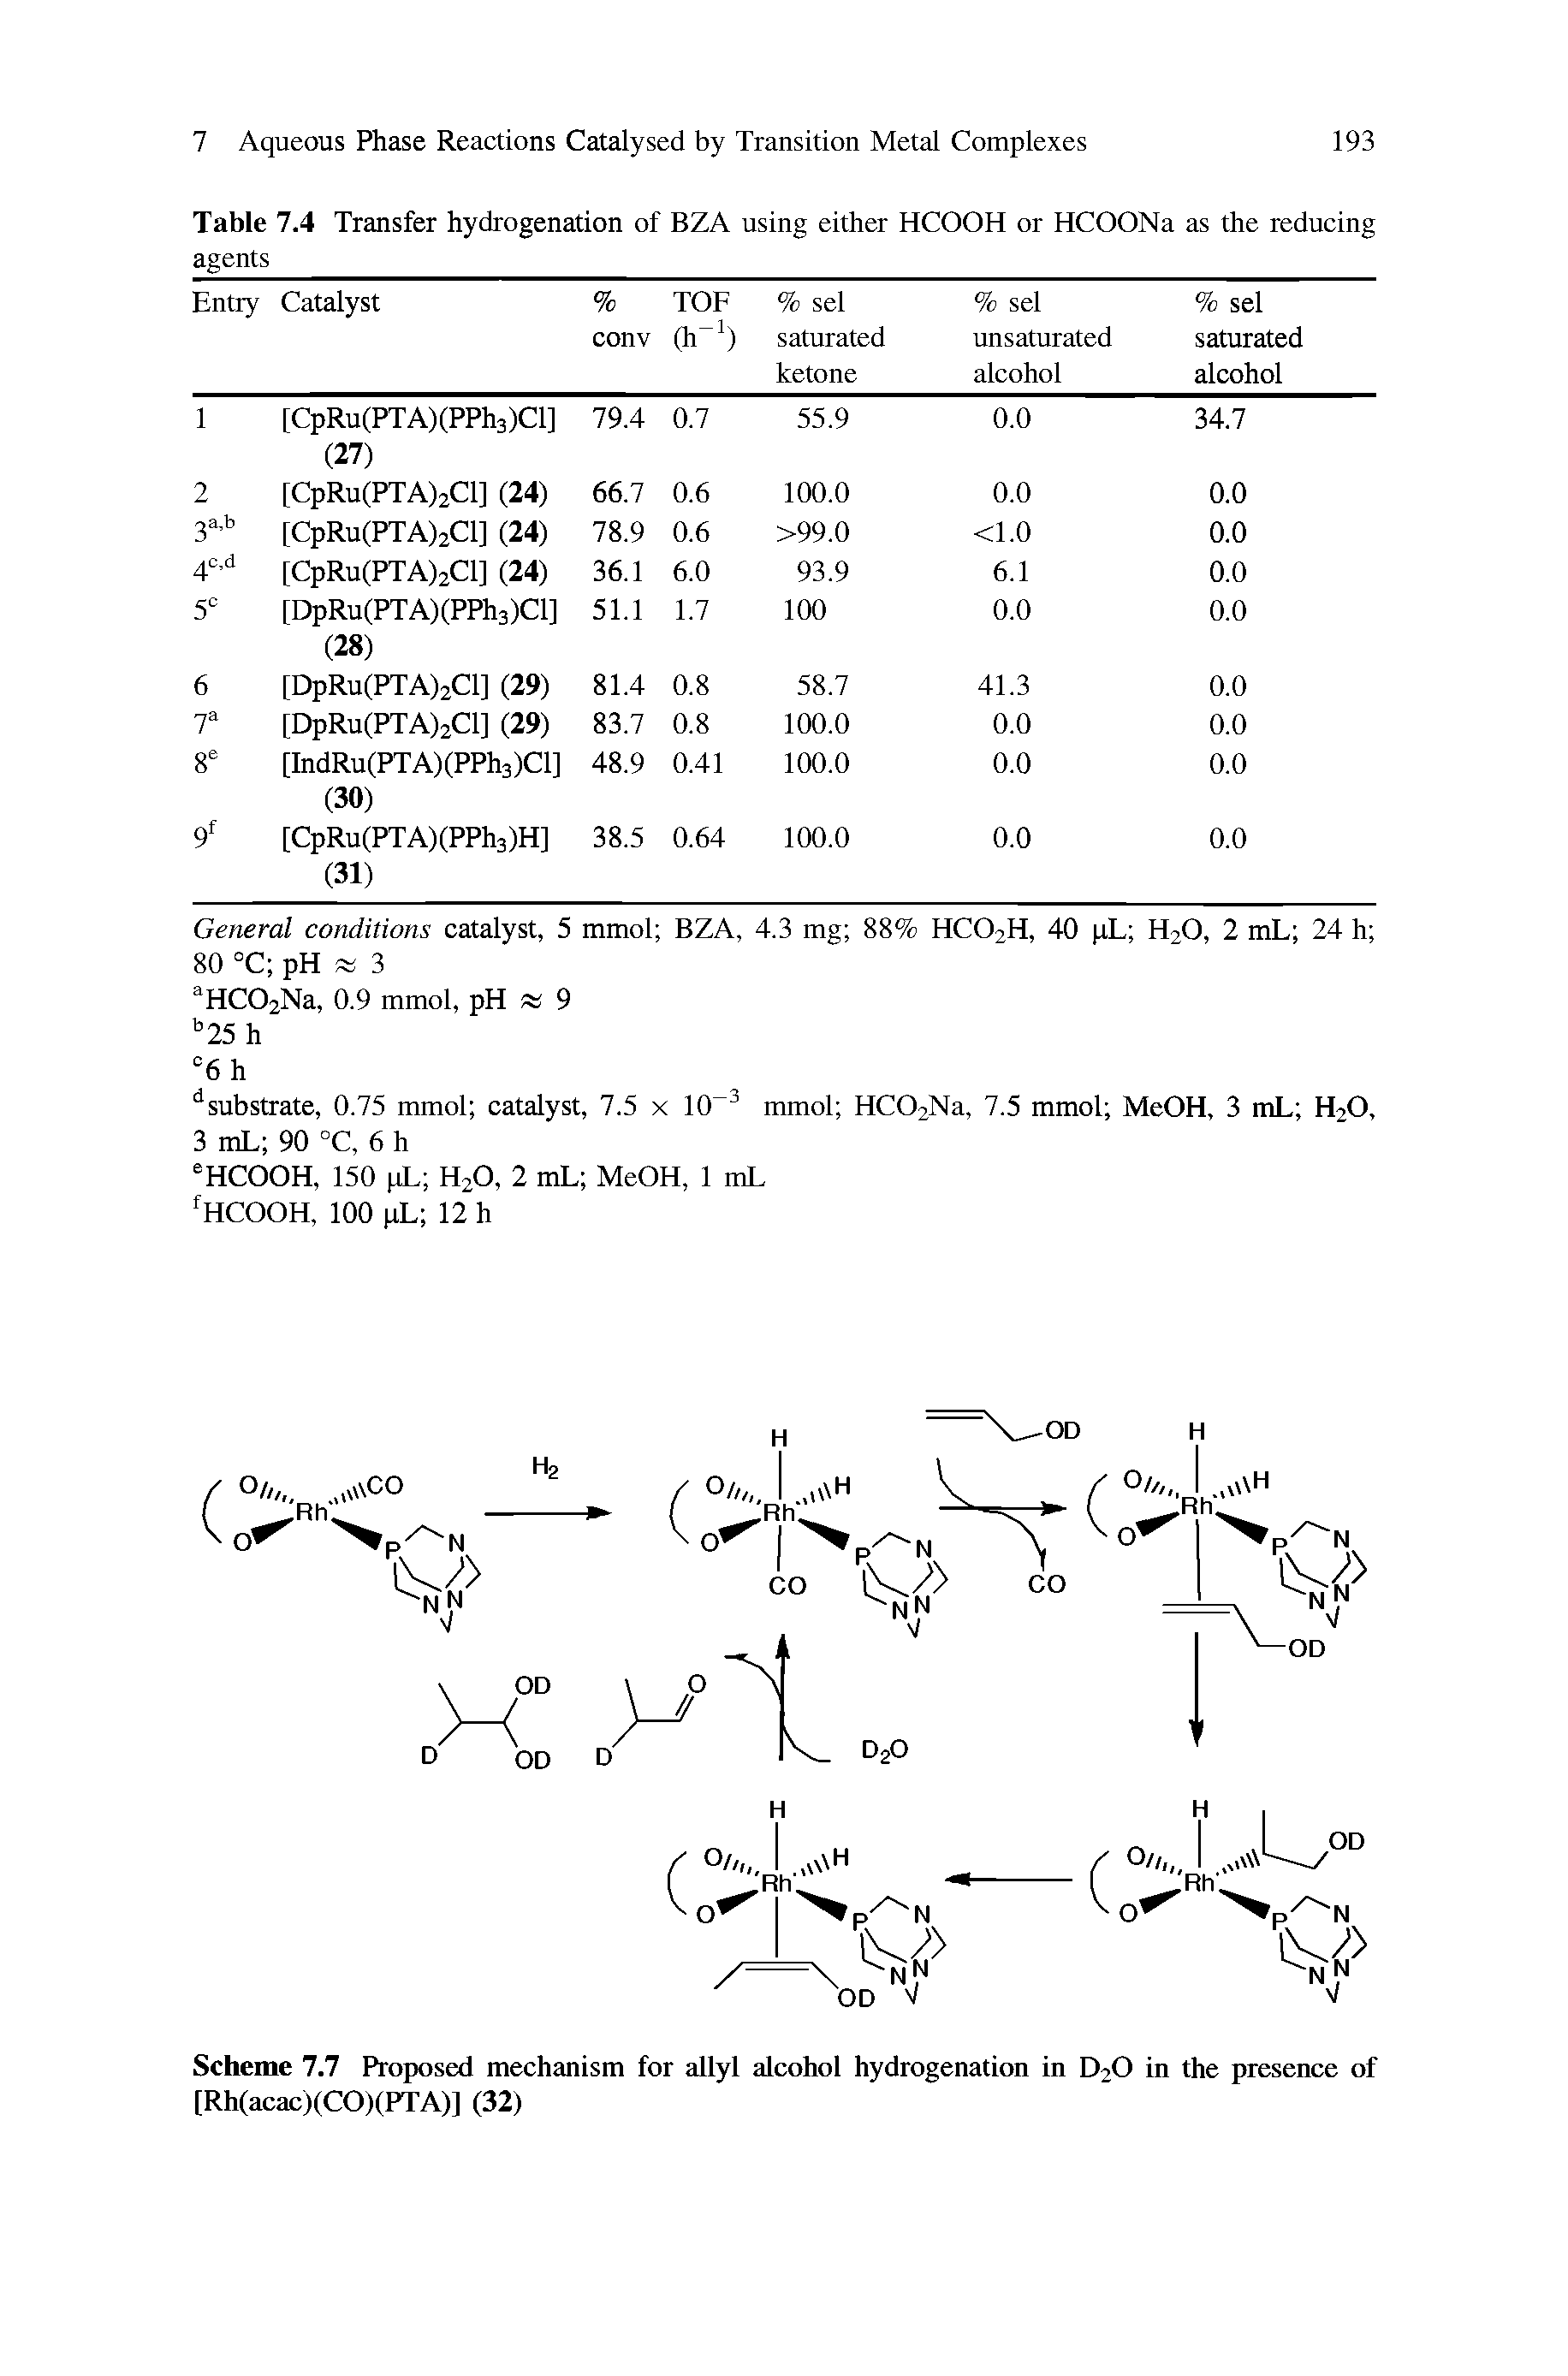 Scheme 7.7 Proposed mechanism for allyl alcohol hydrogenation in D2O in the presence of [Rh(acac)(CO)(PTA)] (32)...